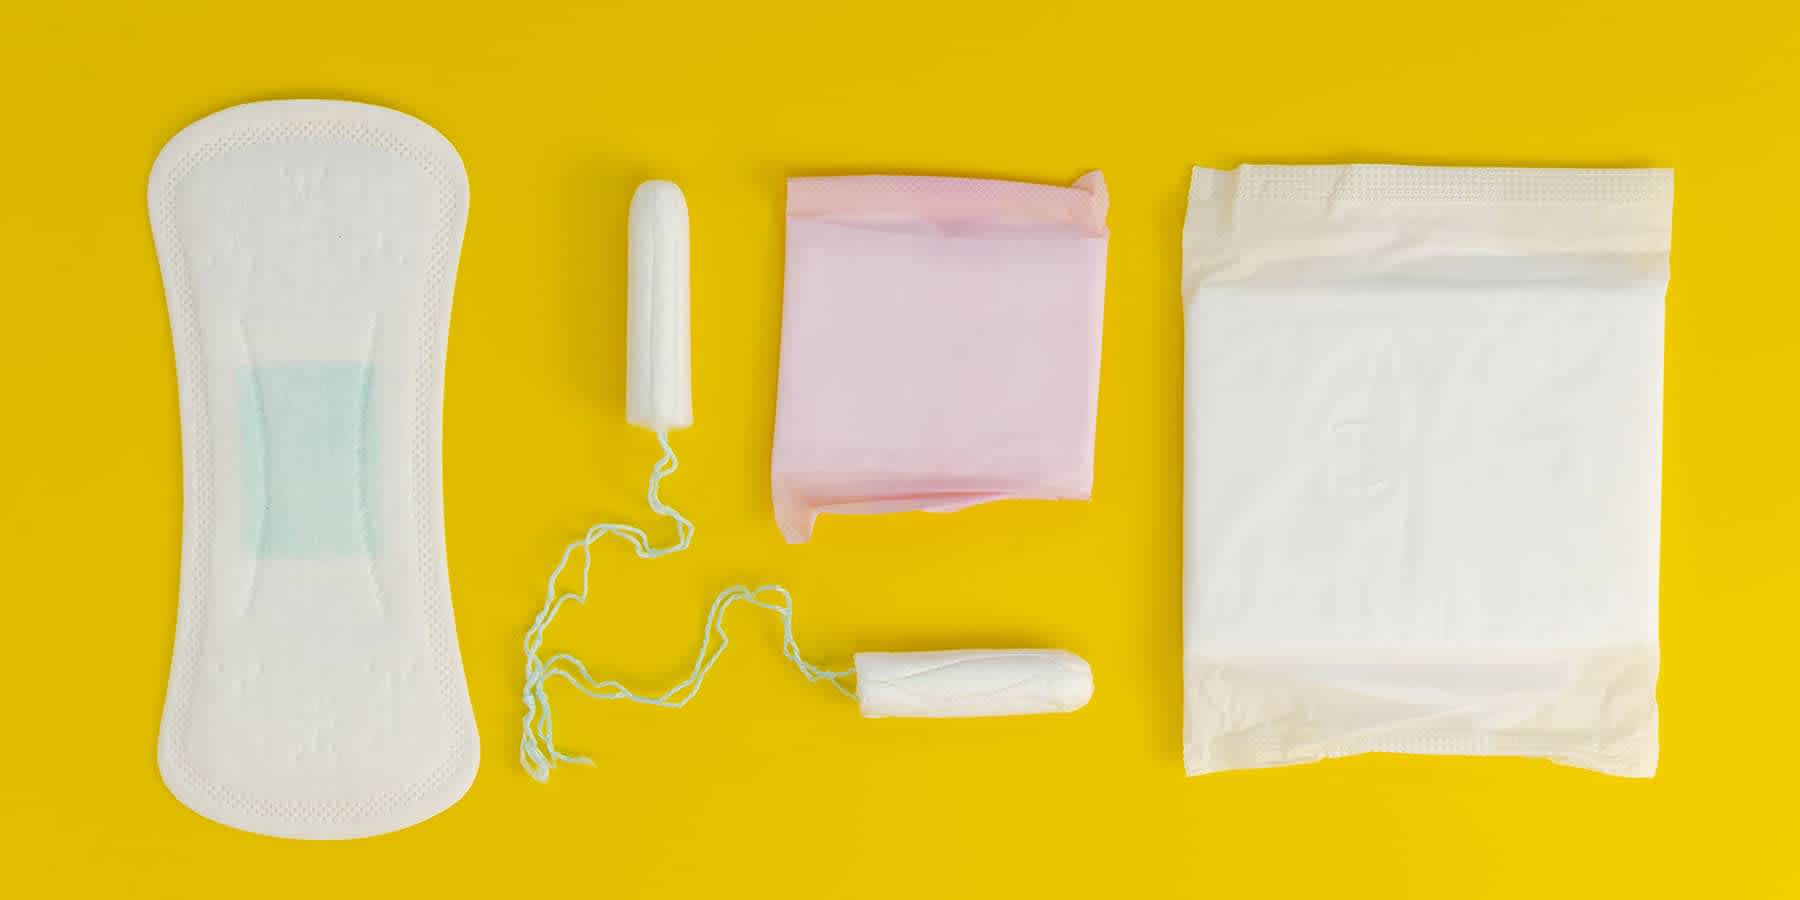 Pads and other period care items against a yellow background